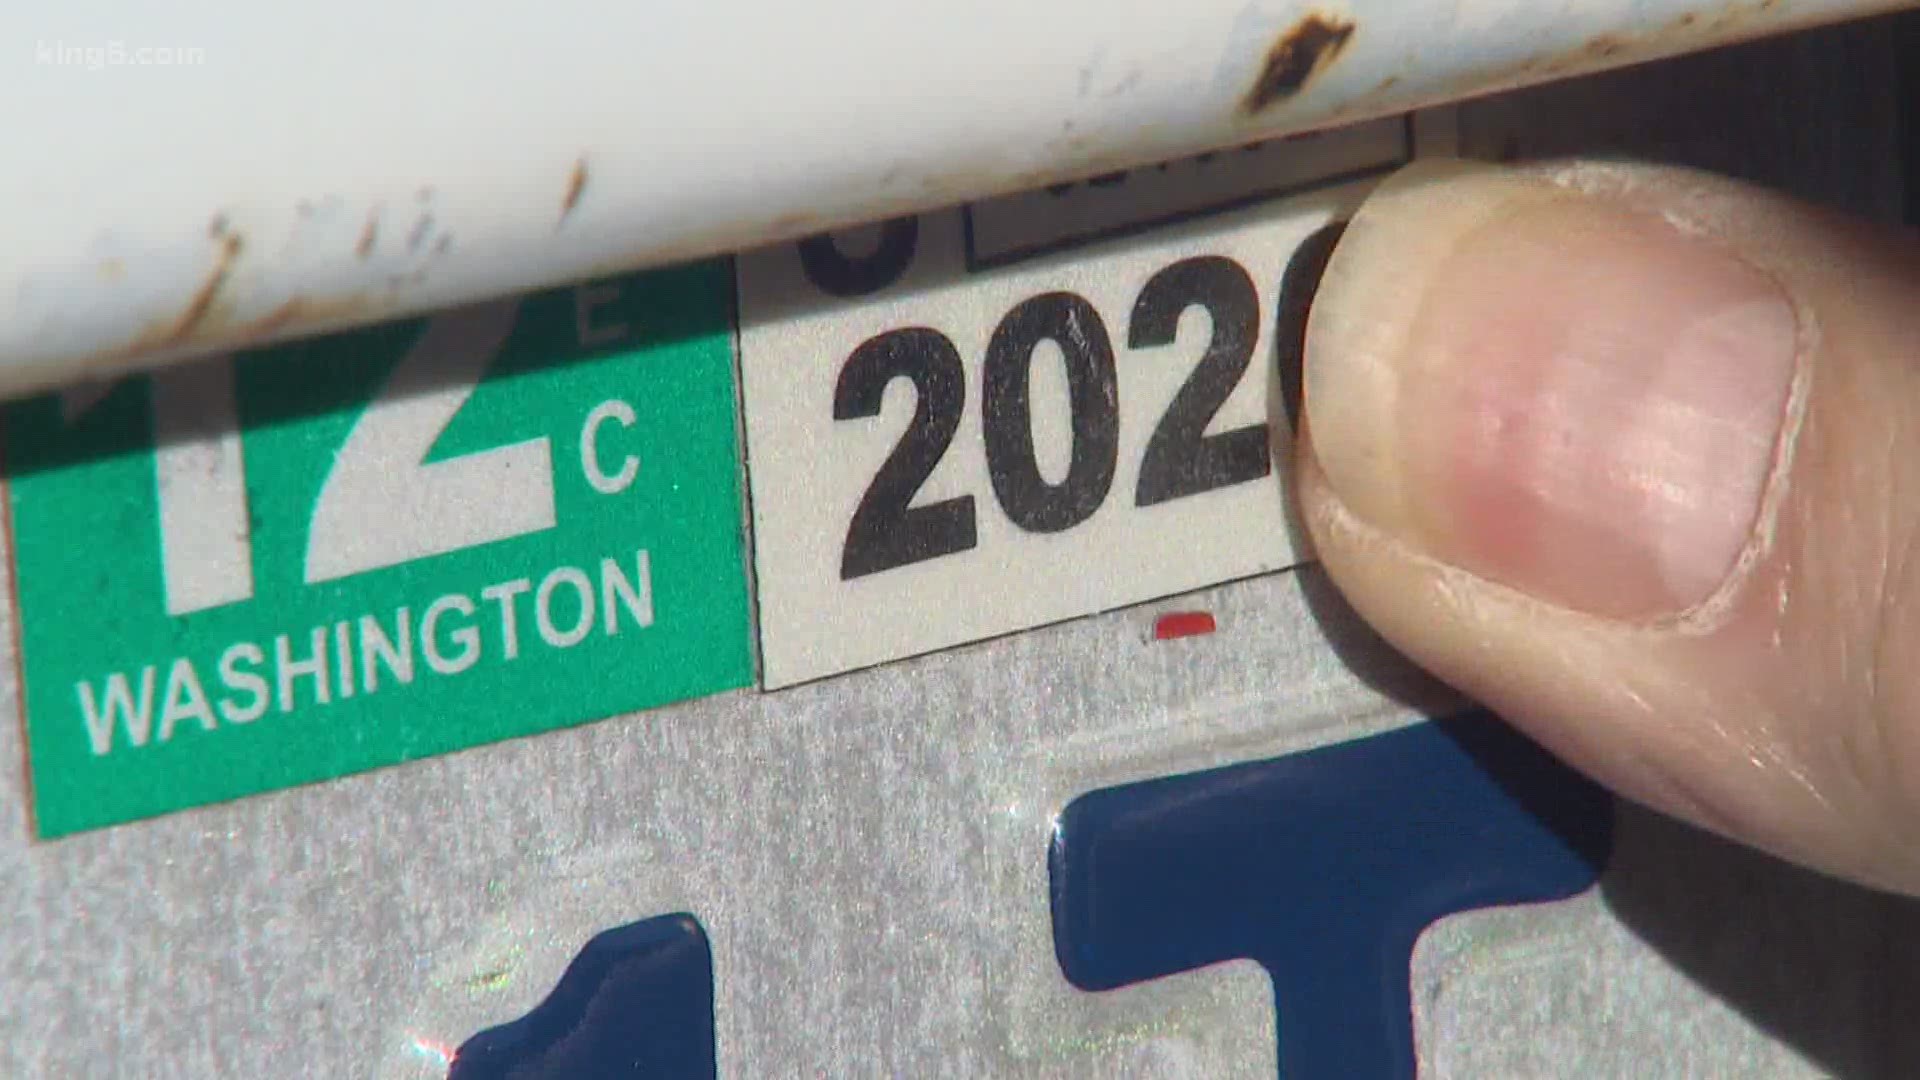 Last November, voters approved I-976 which called for car tab registration to be lowered to $30, but many counties sued, claiming it was unconstitutional.